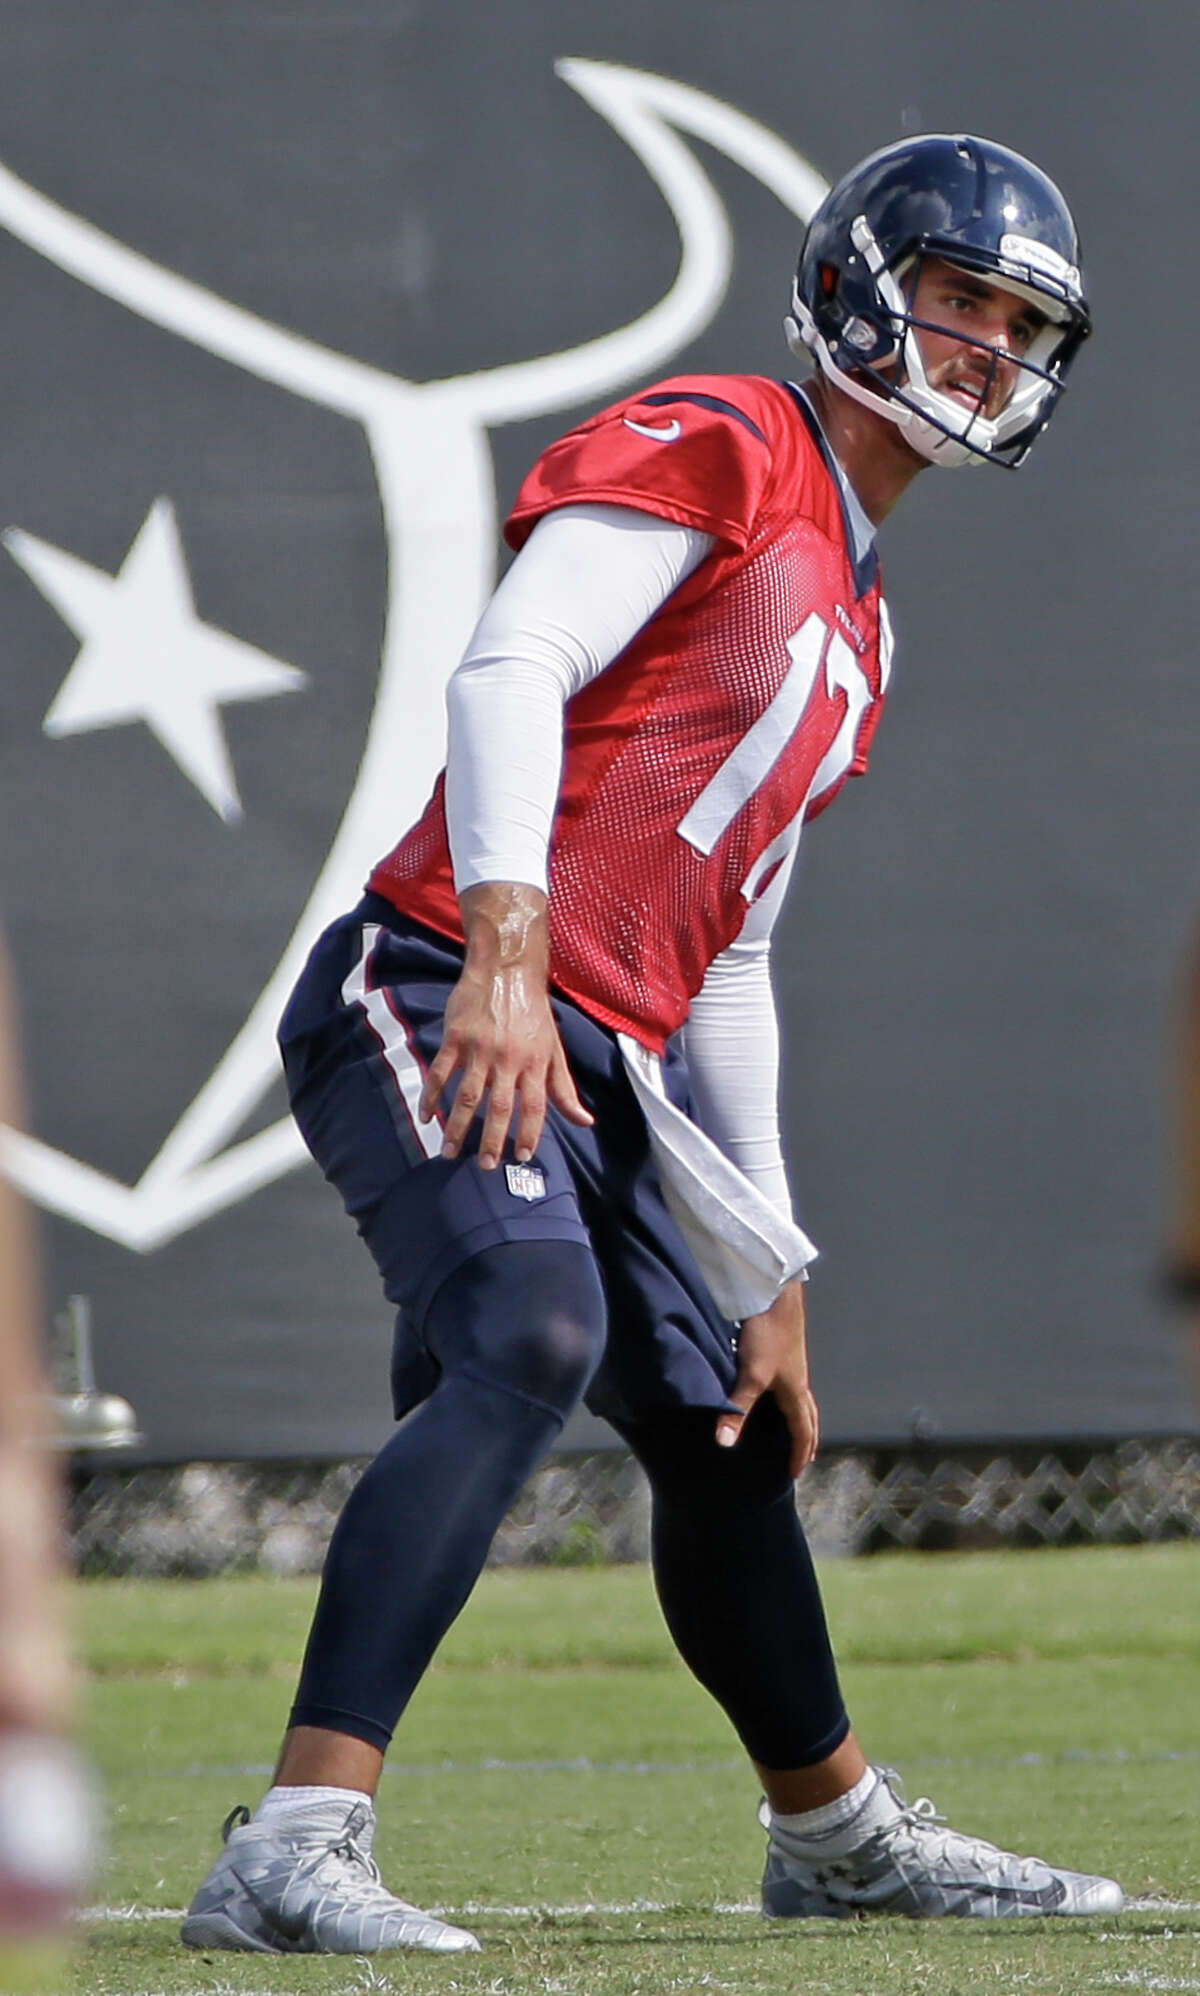 Texans QB Brock Osweiler takes part in June workouts.